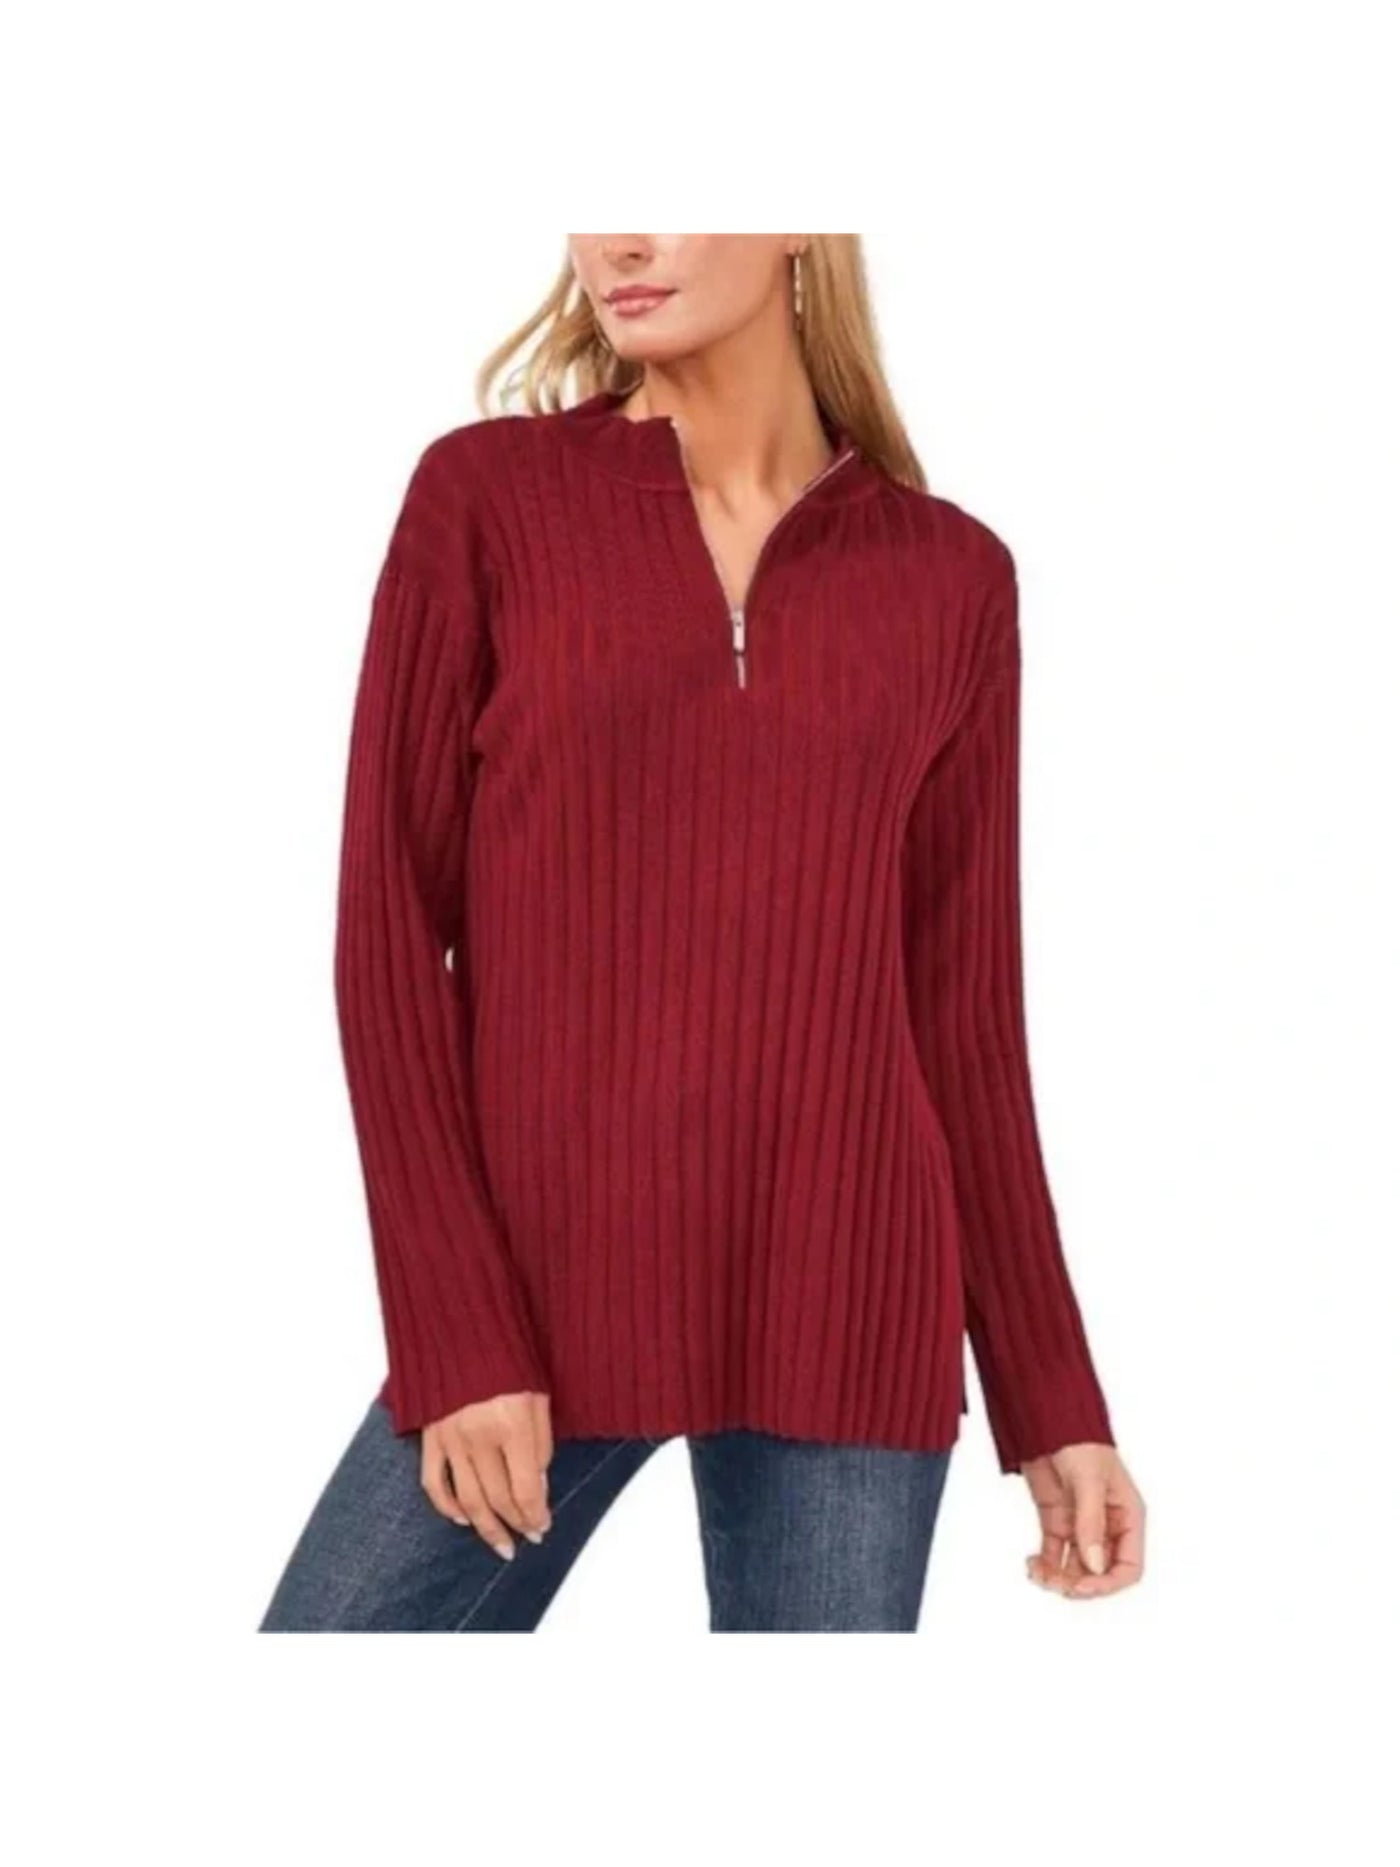 VINCE CAMUTO Womens Maroon Ribbed Quarter Zip Long Sleeve Mock Neck Sweater L